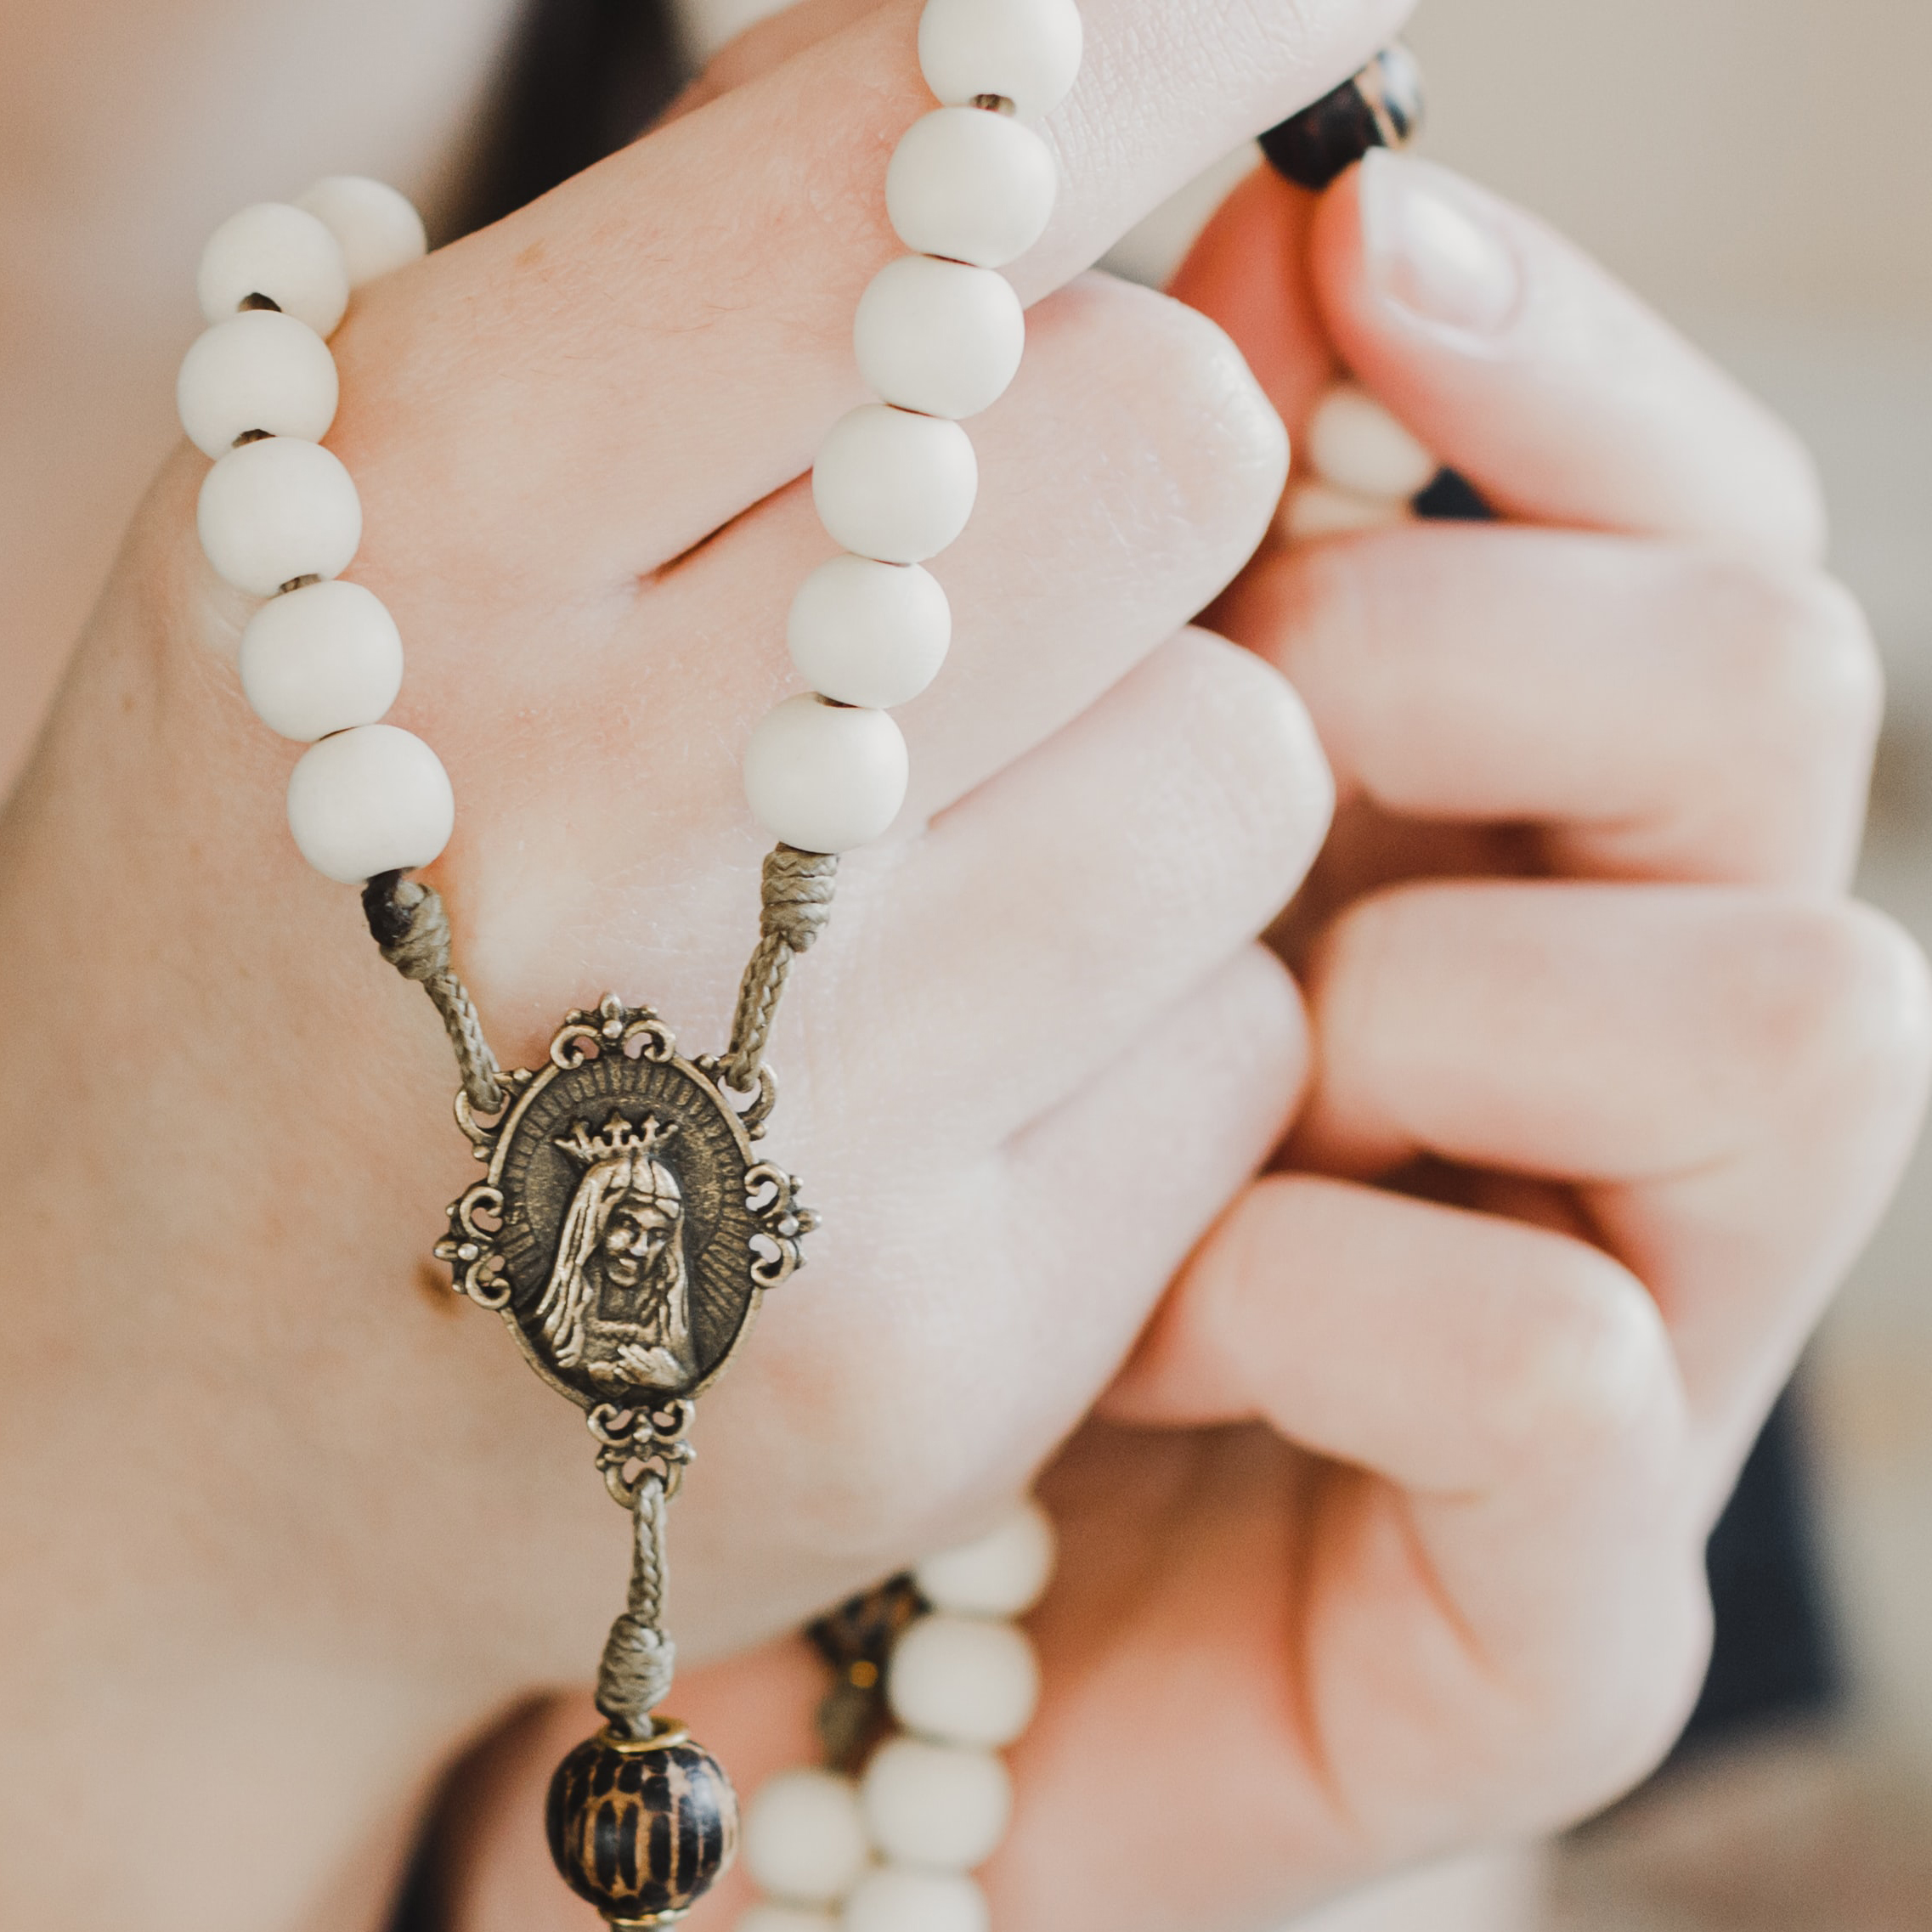 hands holding the rosary